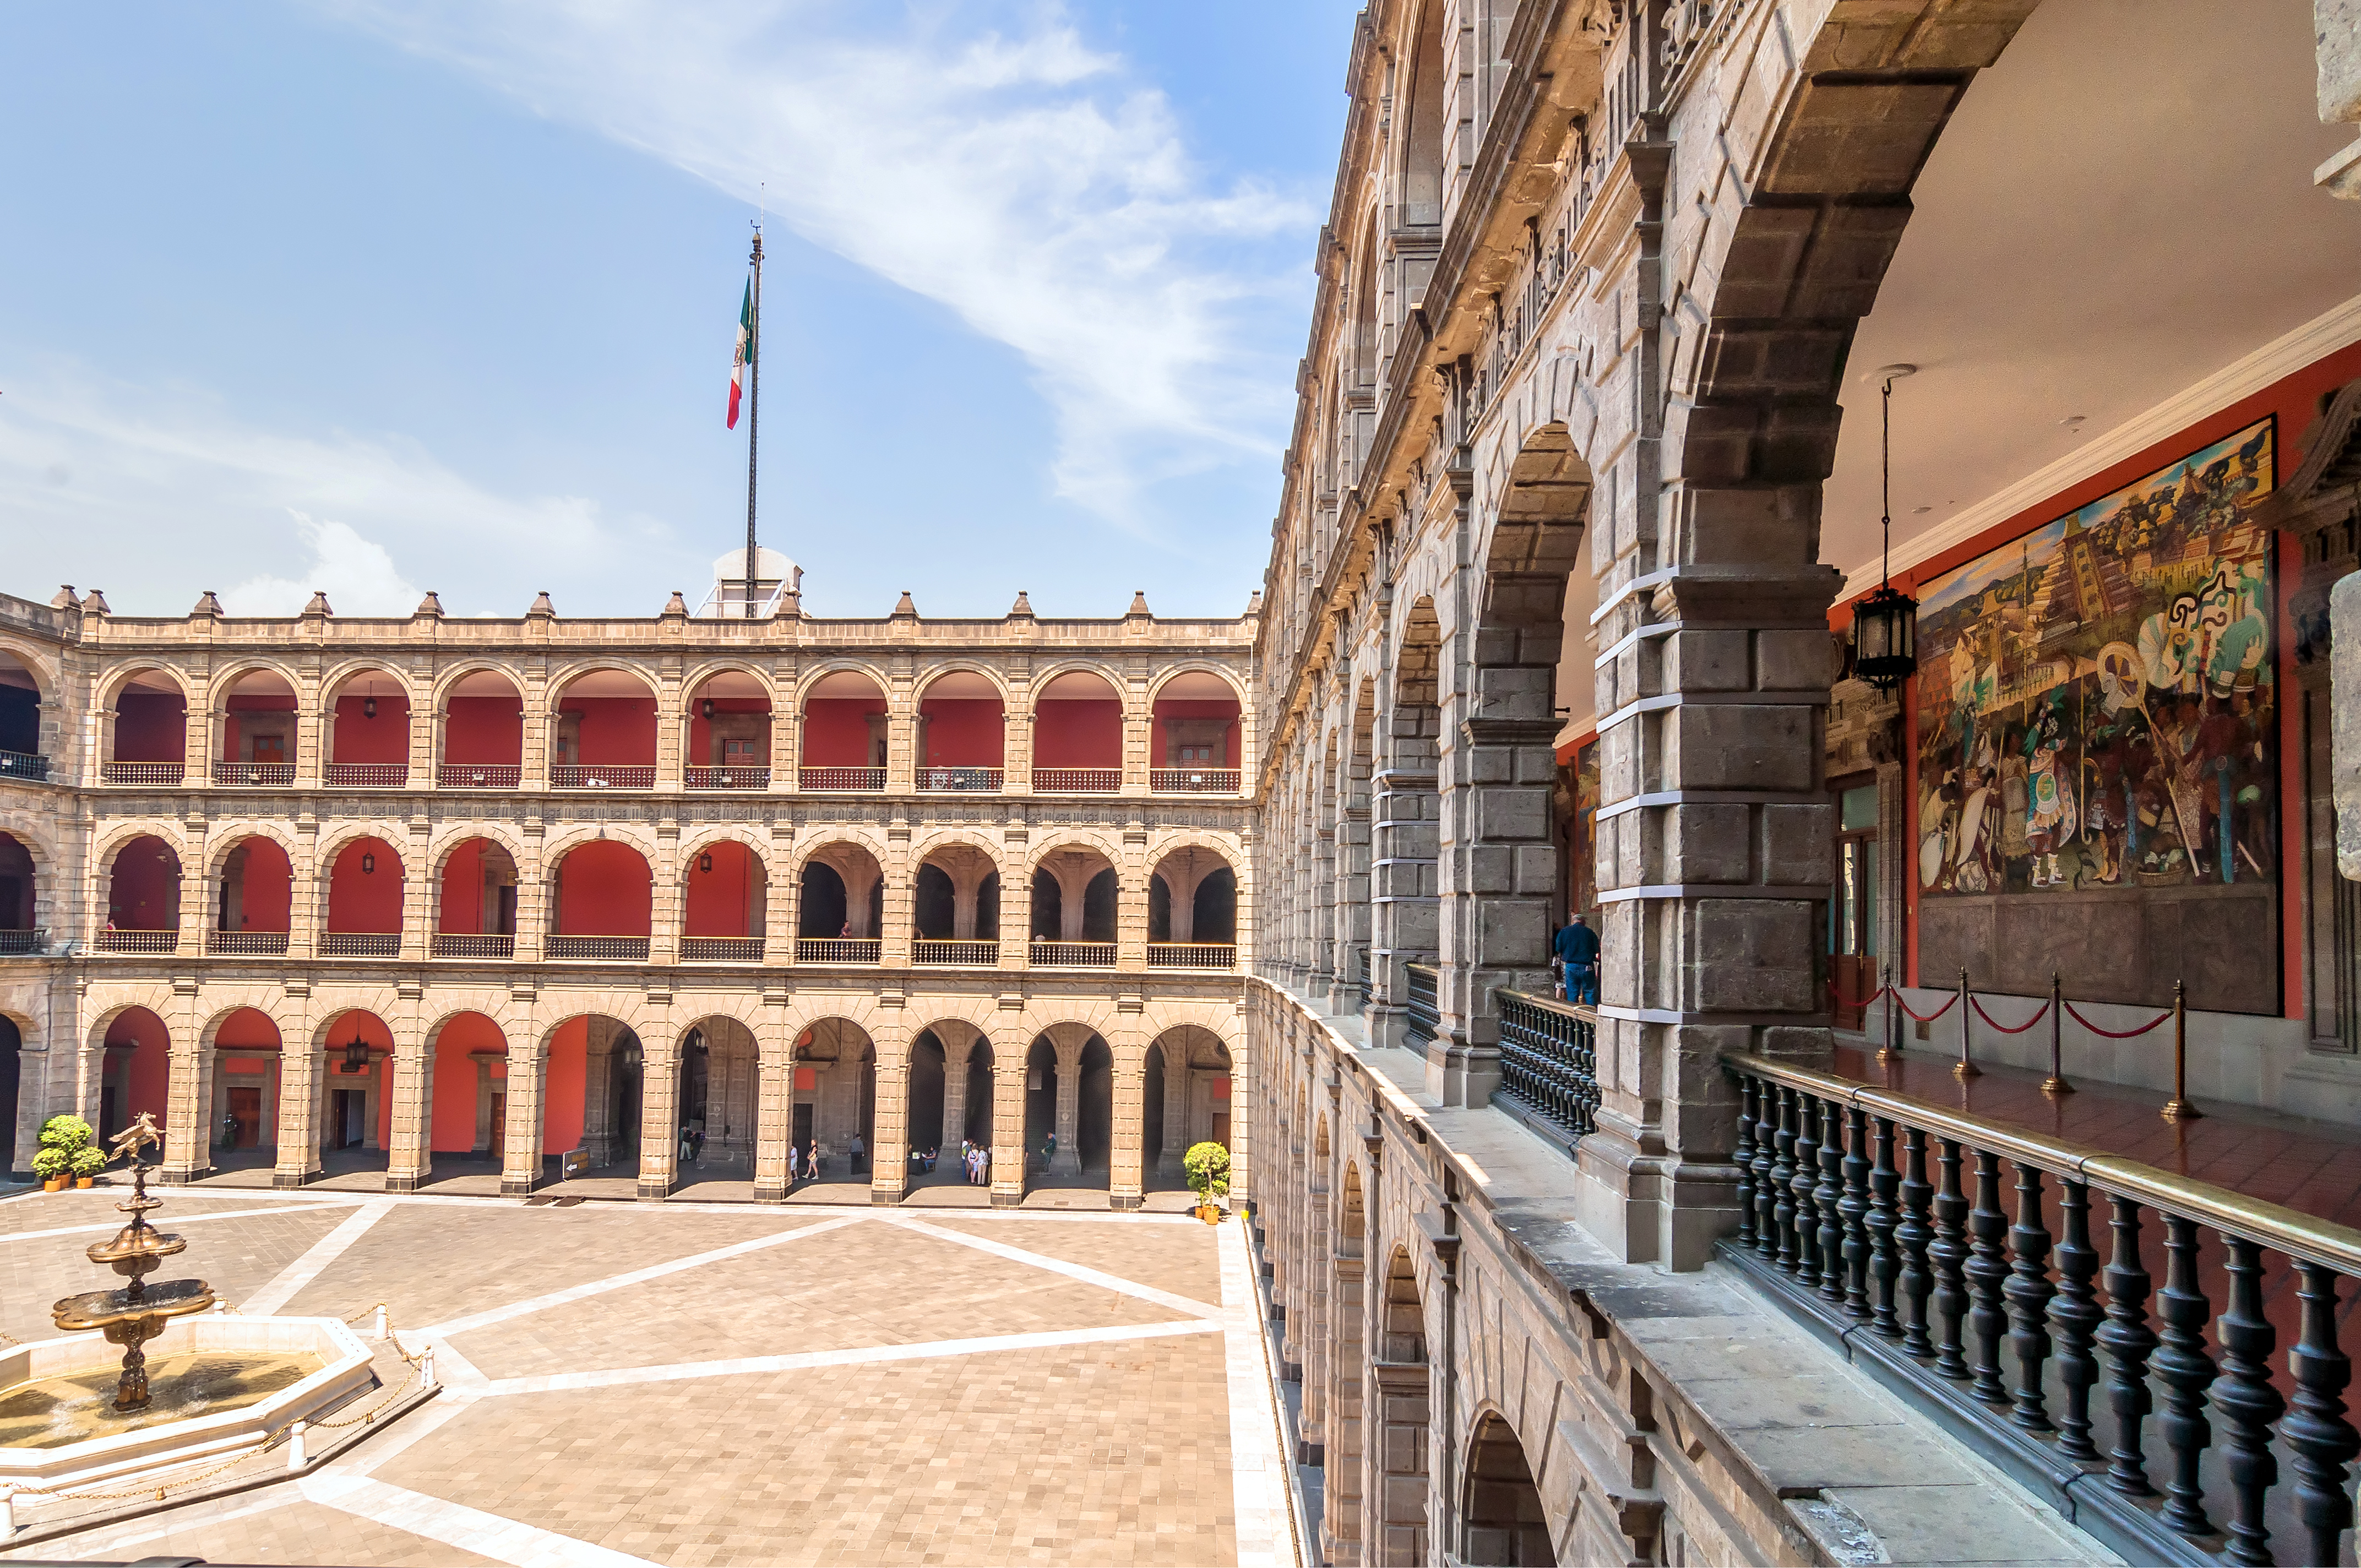 View of Inner Courtyard, National Palace, Mexico City